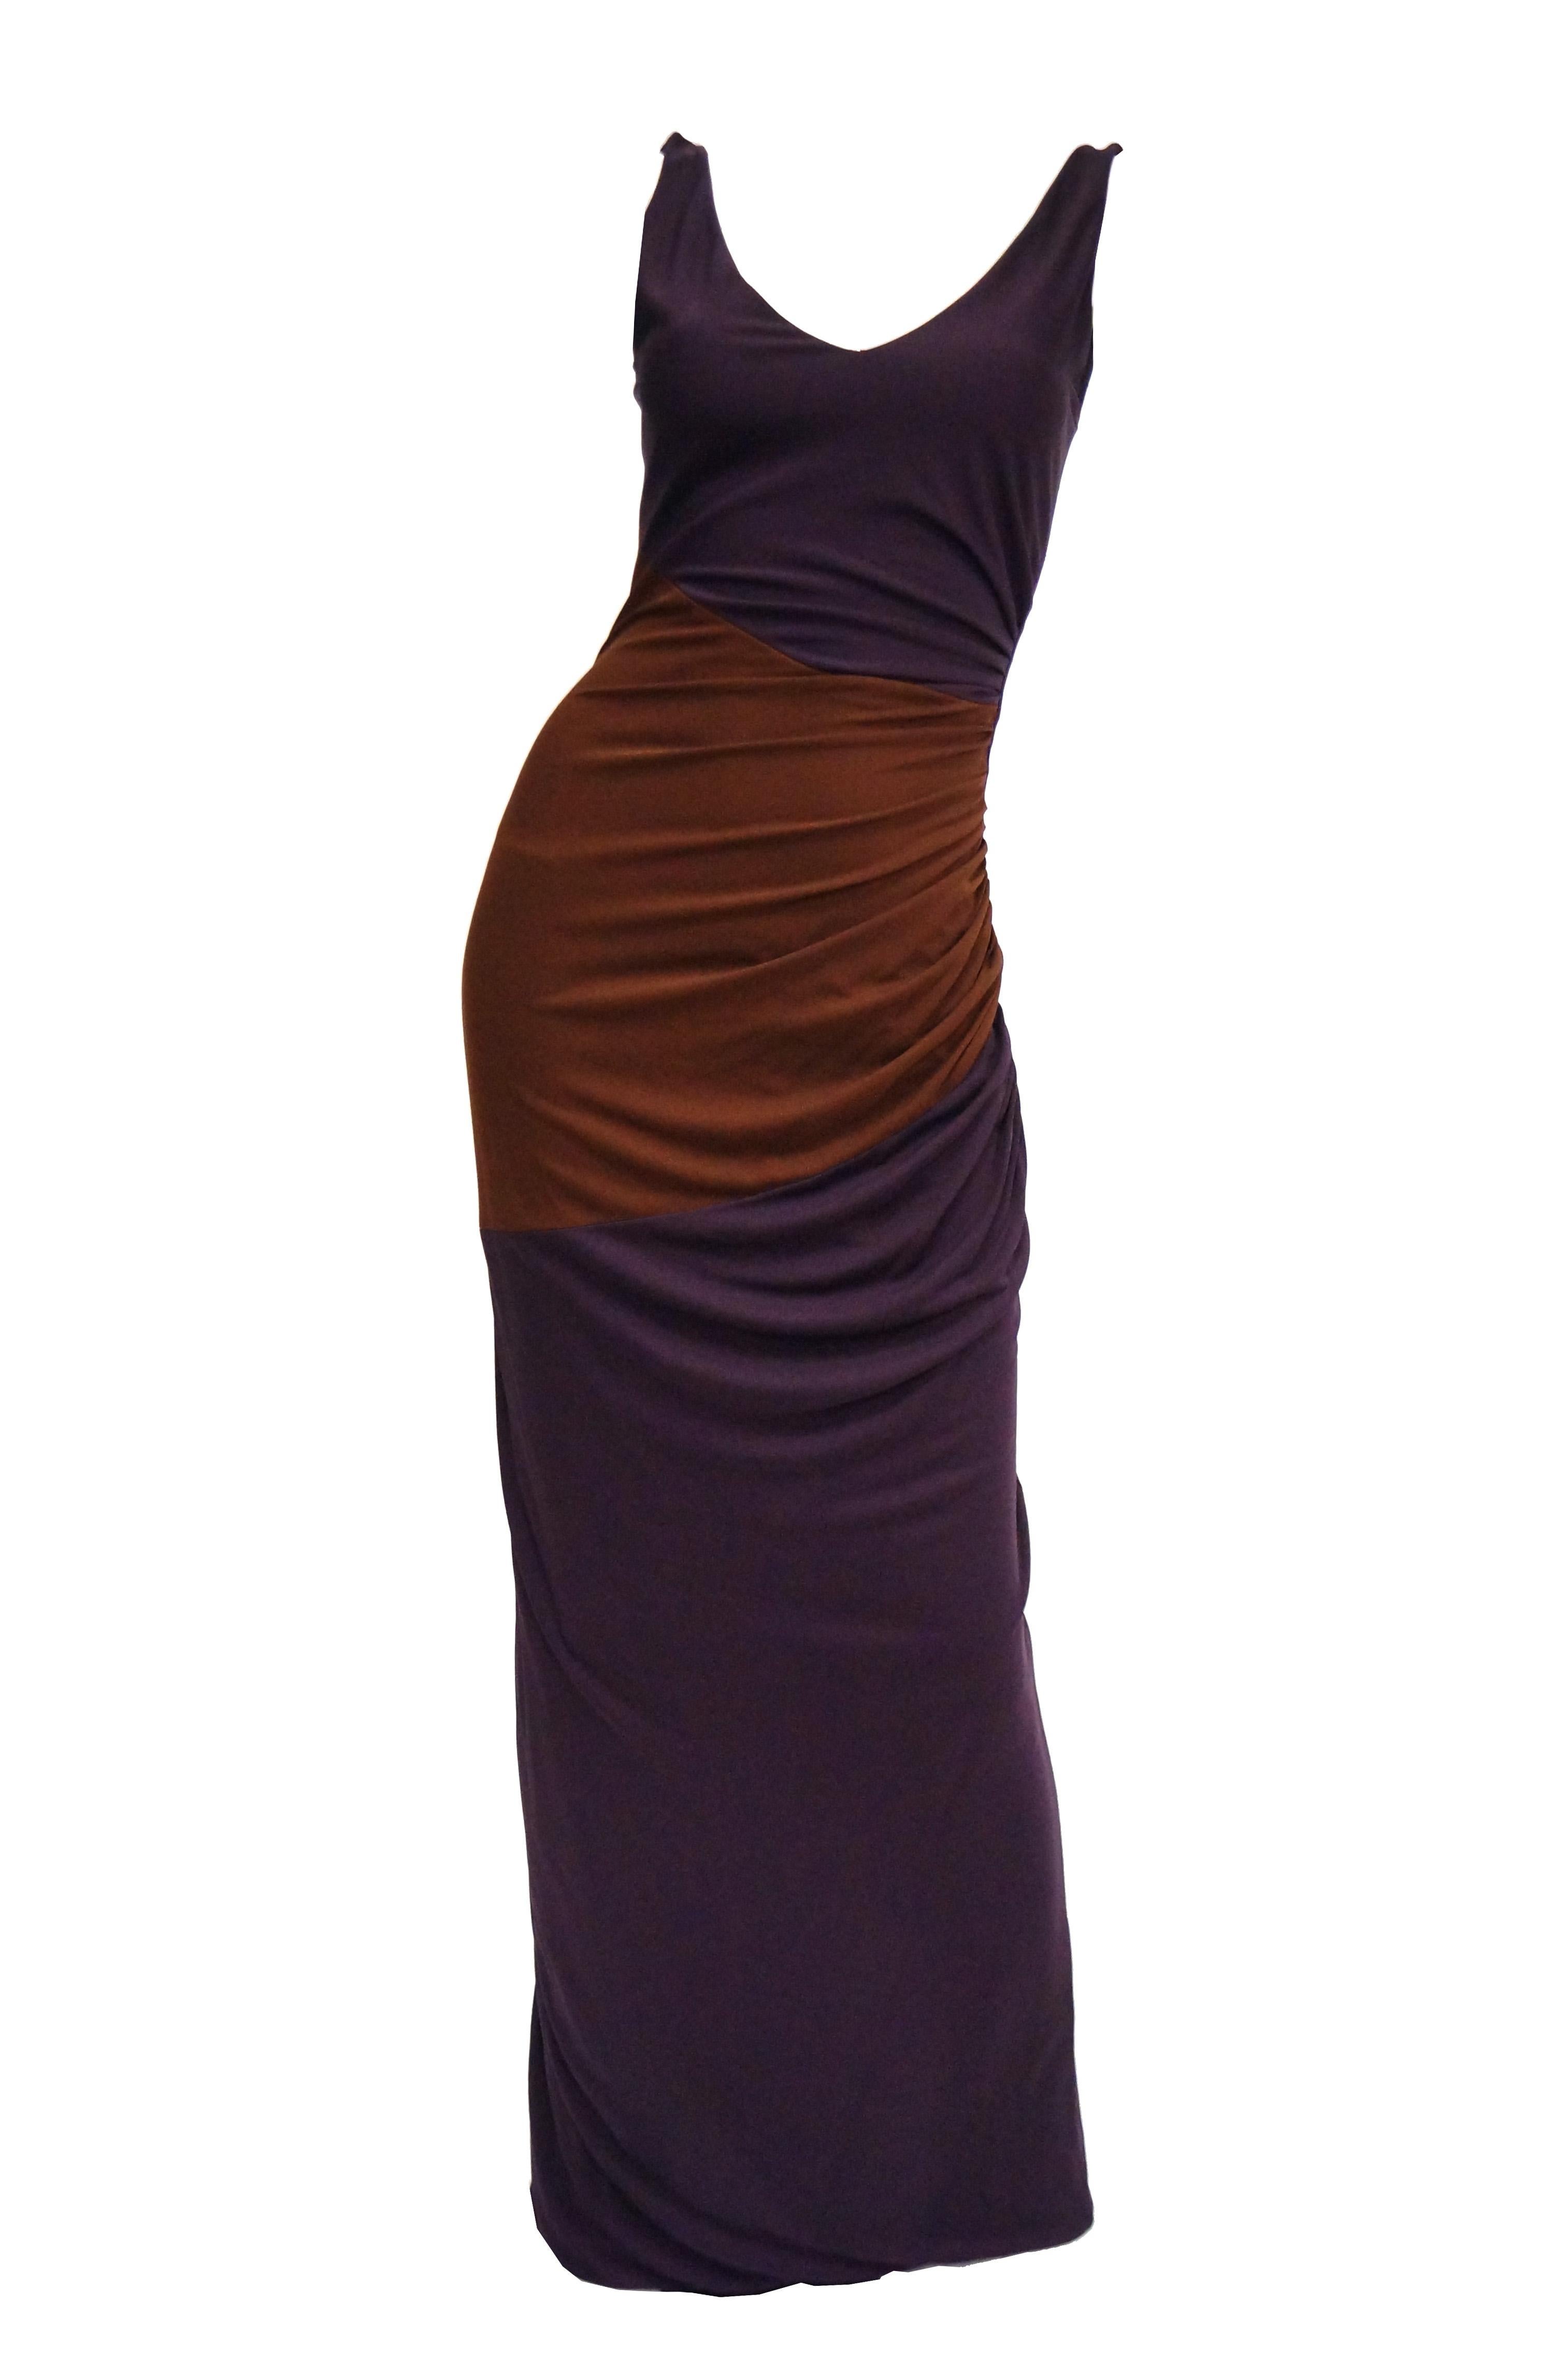 Black 2007 Donald Deal Aubergine and Ginger Colorblock Drape Bodycon Evening Dress For Sale